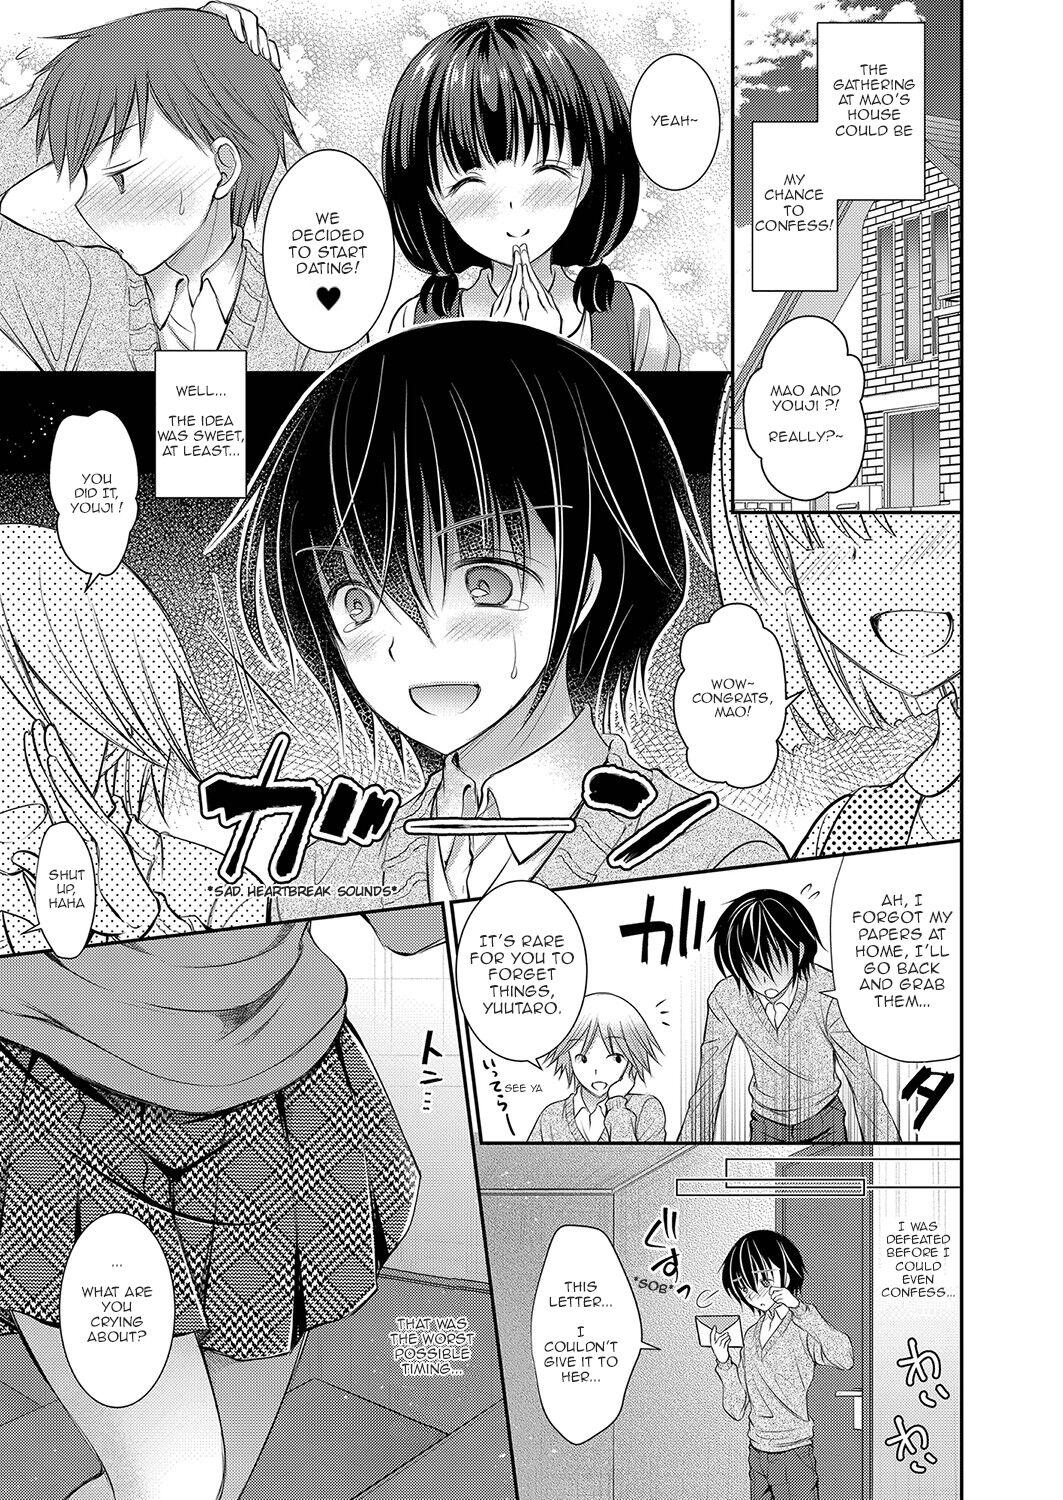 Suki na Musume no Onee-san | The Older Sister of the Girl That I Like Ch1 2